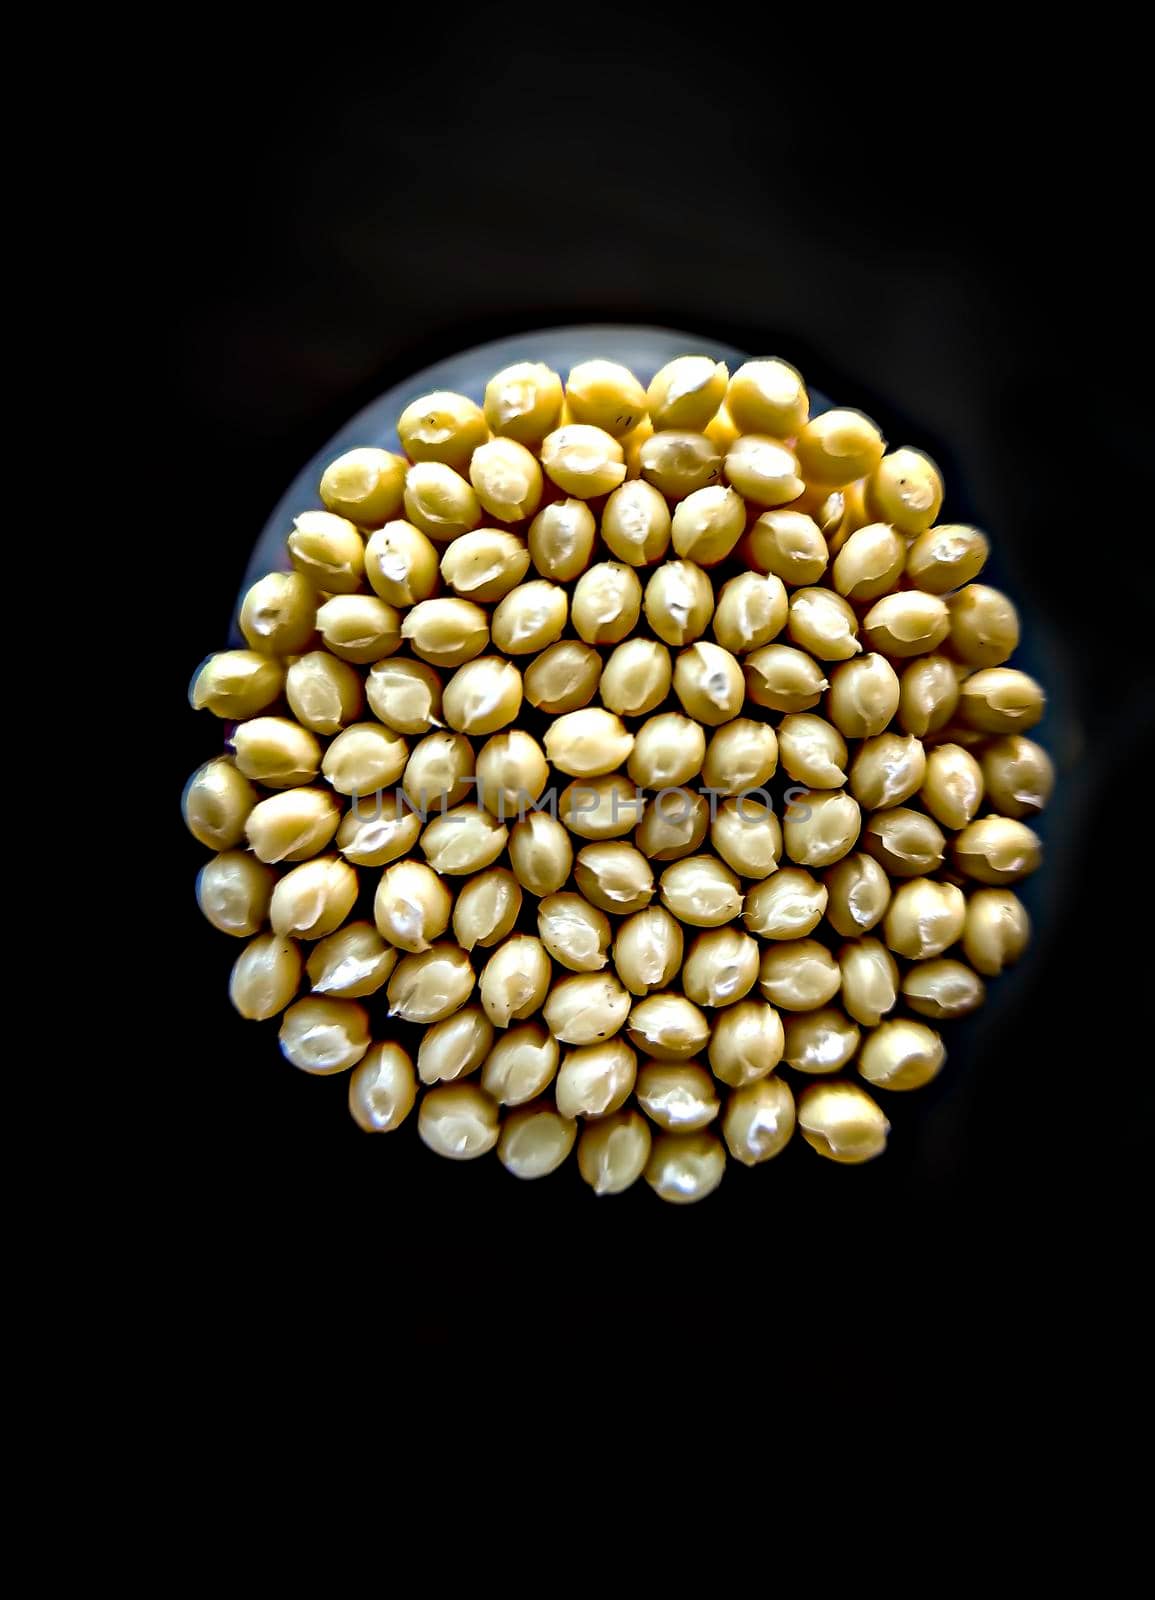 Extreme close up image of toothpick stick tips kept in a jar.